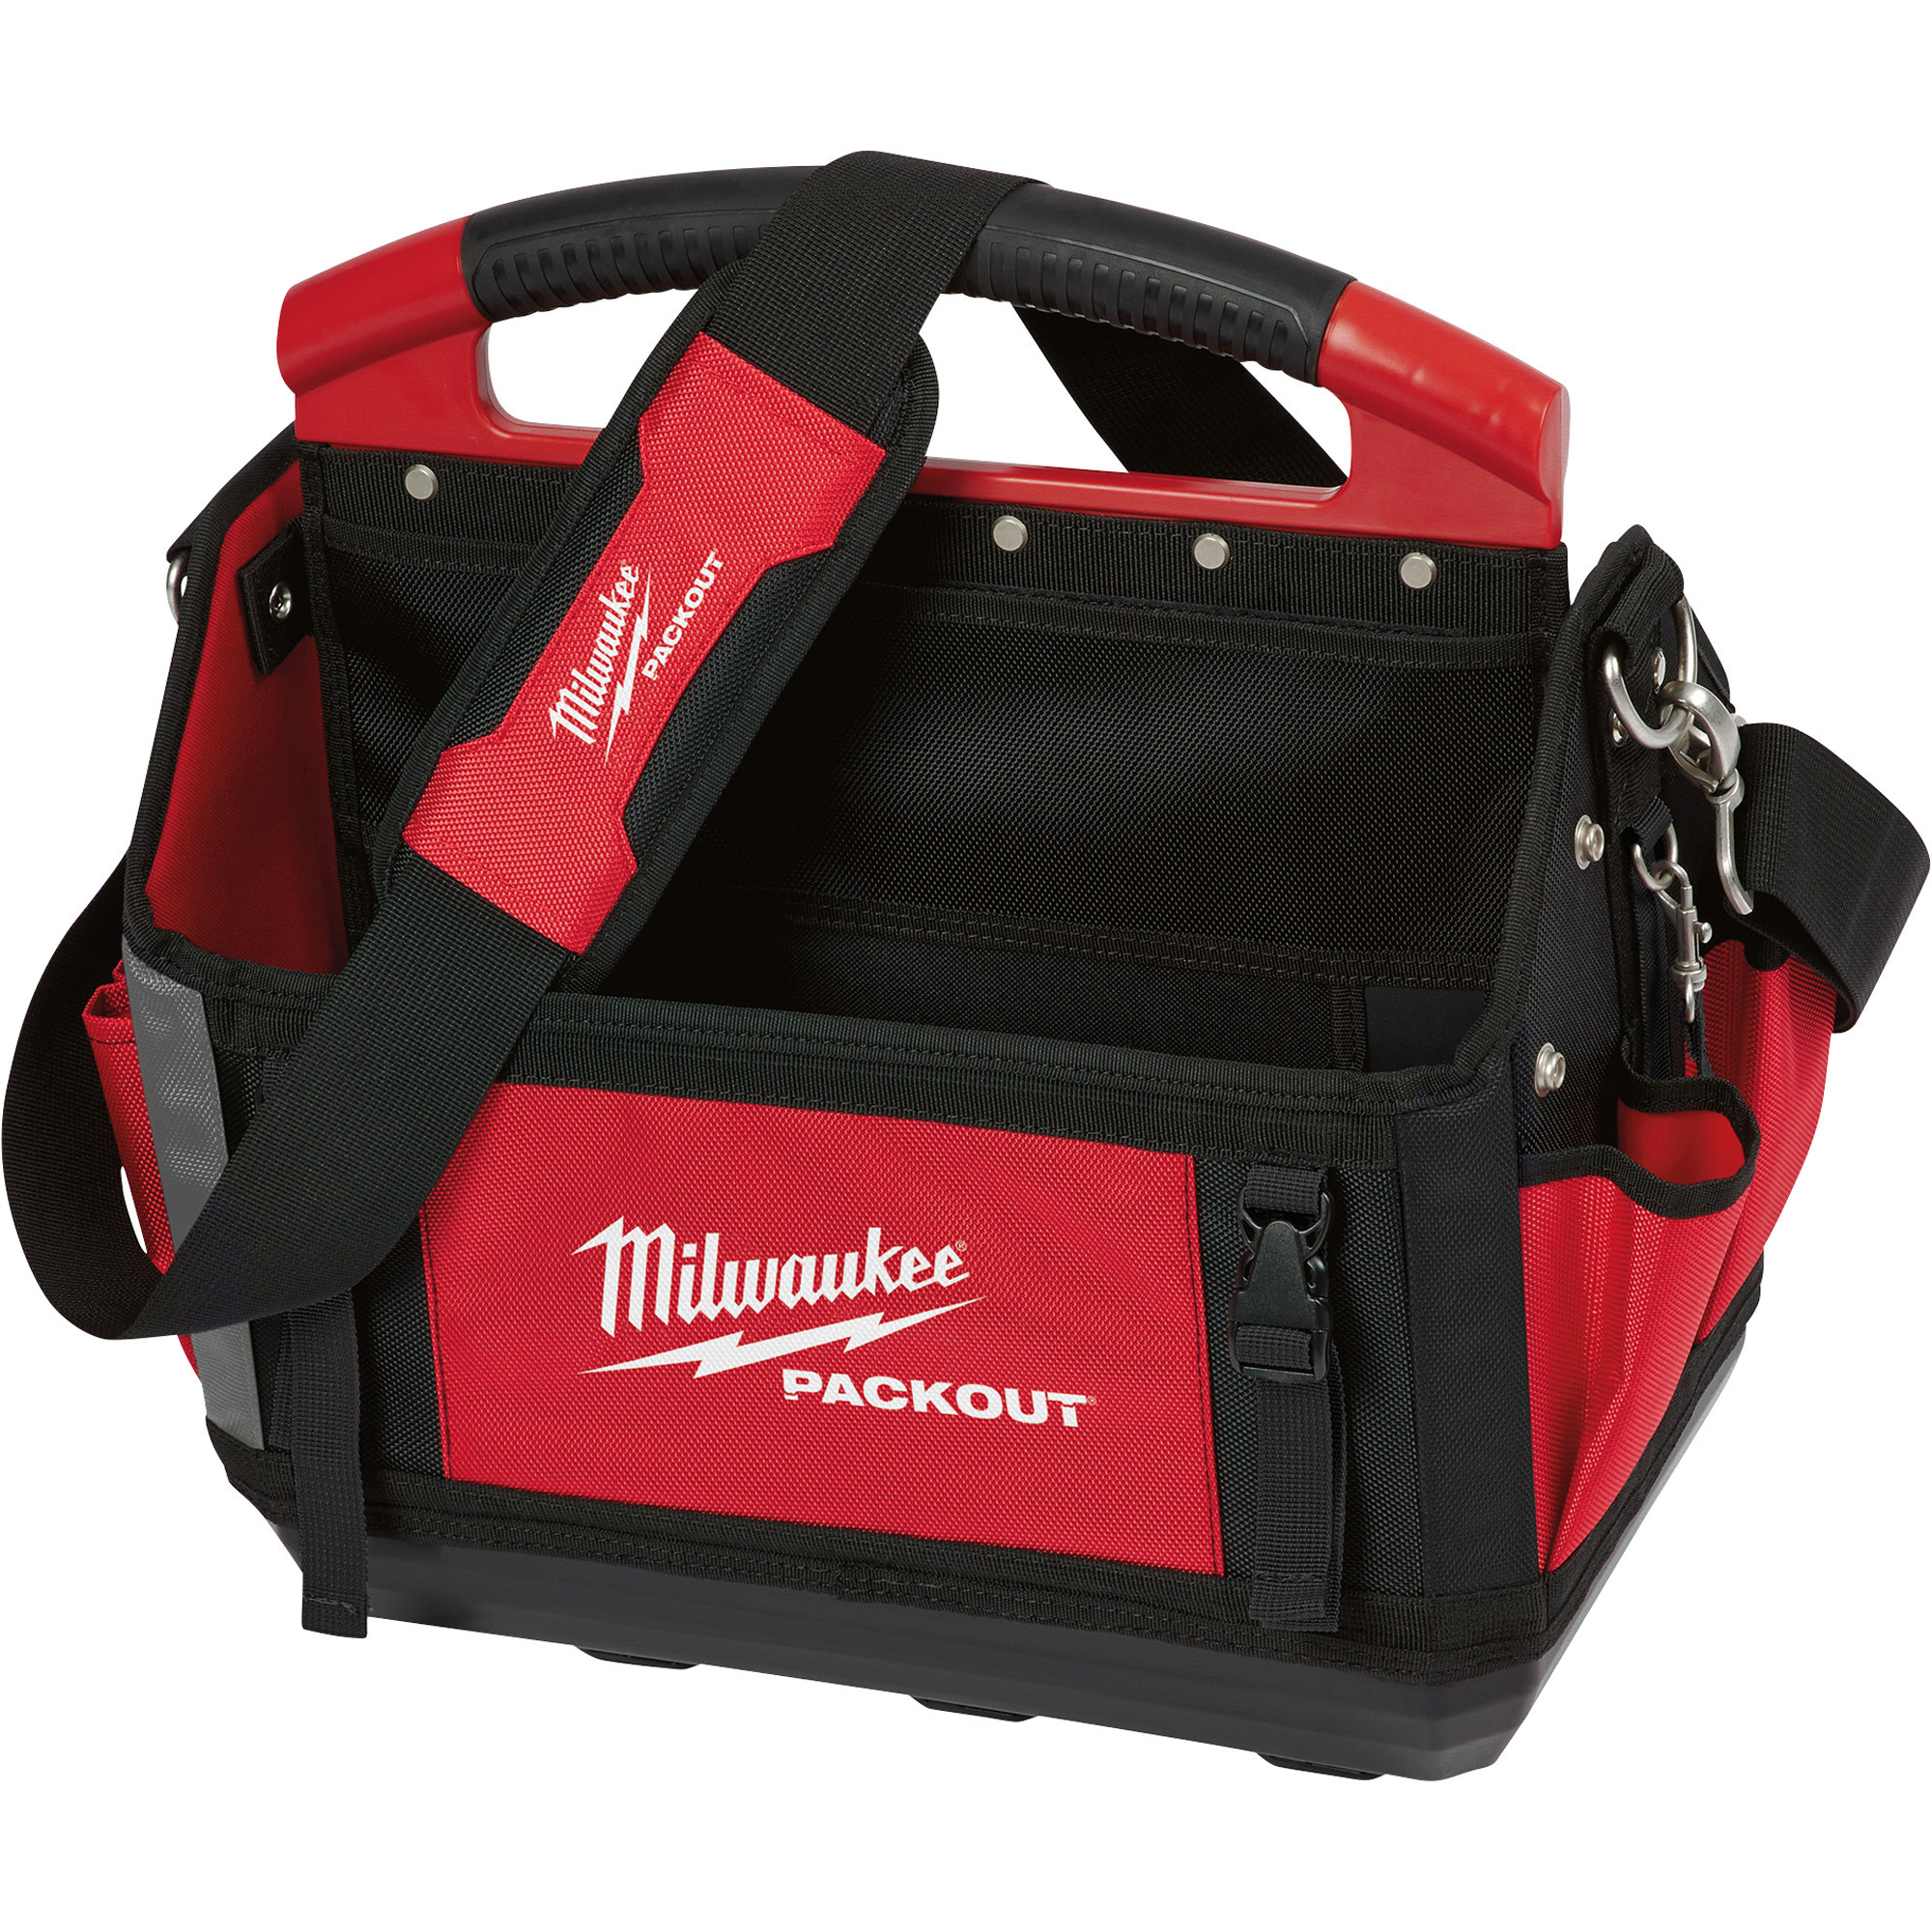 Milwaukee Packout 15Inch Storage Tote, 17Inch W x 15Inch D x 11Inch H, Model 48-22-8315